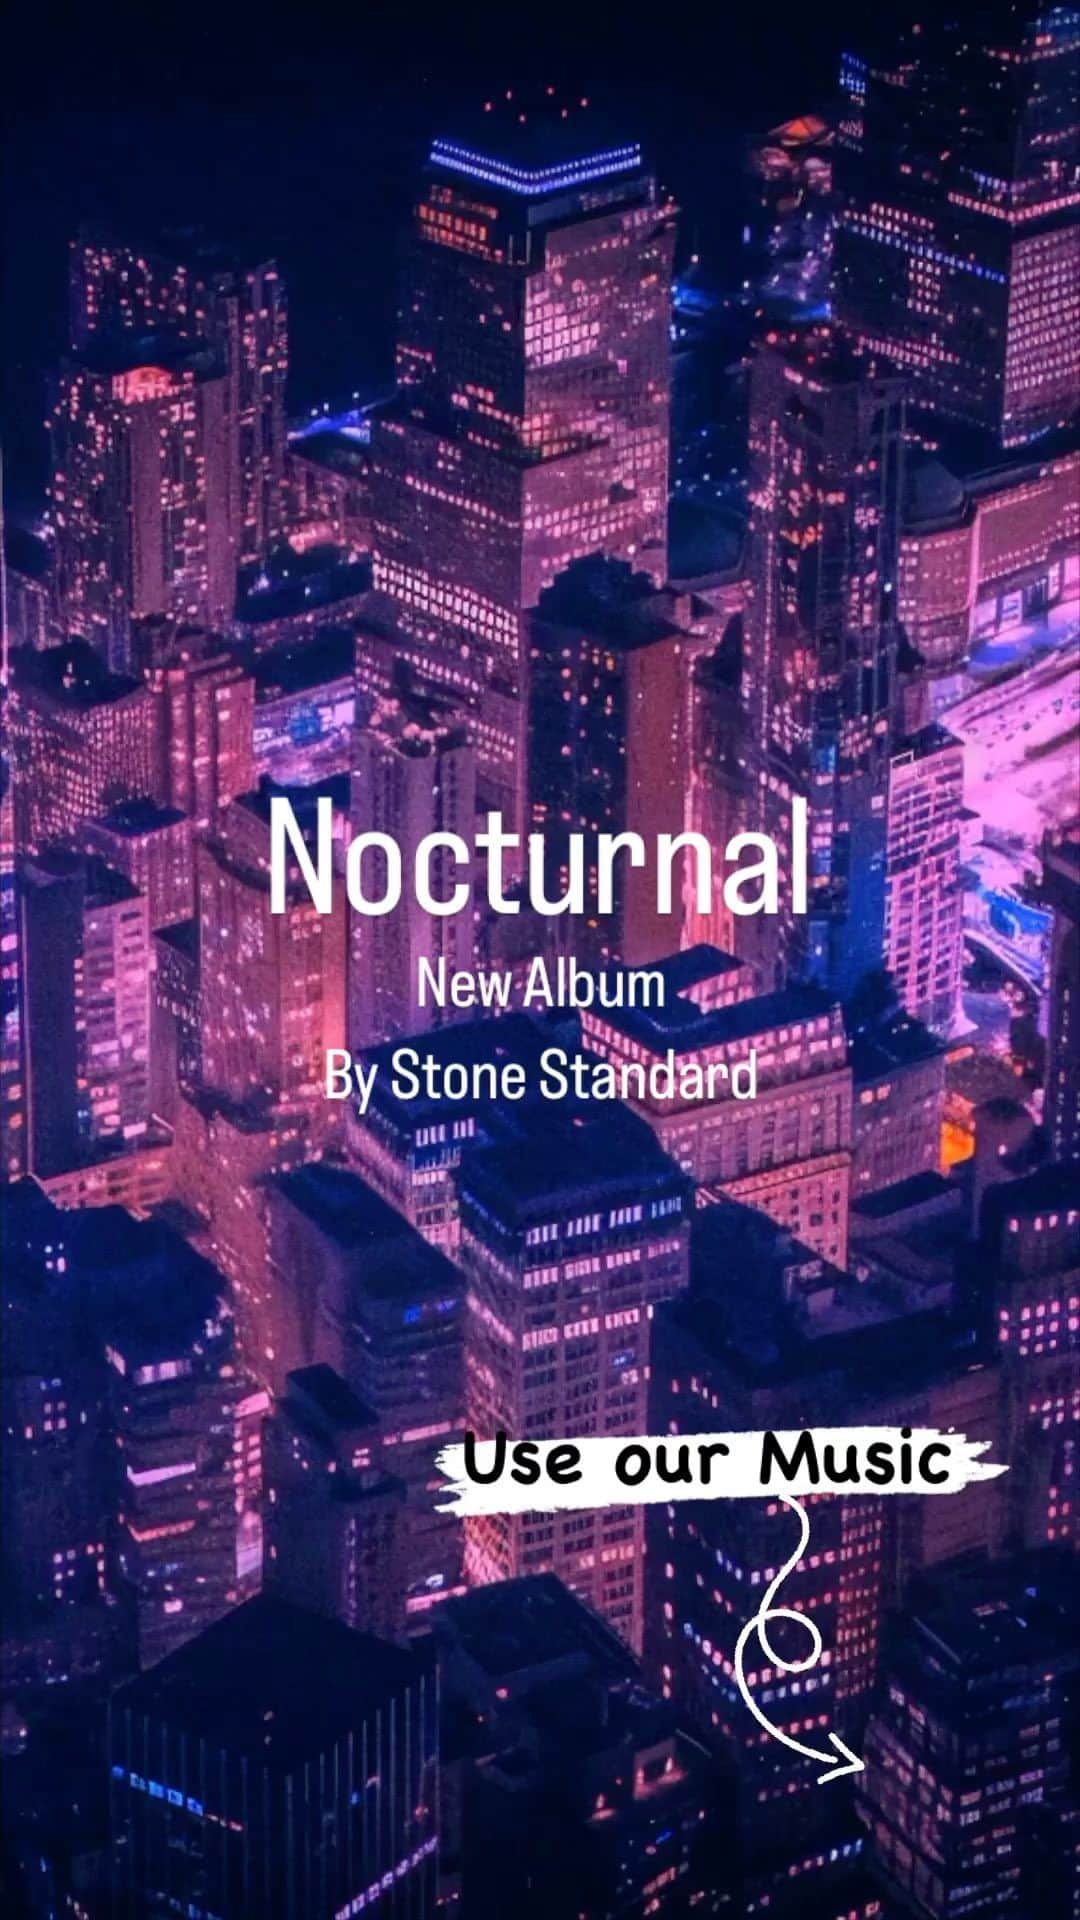 Cafe Music BGM channelのインスタグラム：「Savor the Night with 'Nocturnal' by Stone Standard🌙 A Jazz Serenade Everyday #Night #Jazz #NewAlbum  💿 Listen Everywhere: https://bgmc.lnk.to/wauRYF7S 🎵 Stone Standard: https://bgmc.lnk.to/XFQh5jsr  ／ 🎂 New Release ＼ November 3rd In Stores 🎧 Nocturnal By Stone Standard  #EverydayMusic #StoneStandard #NocturnalJazz #SavorTheNight #NighttimeSerenade #RelaxationPlaylist #MoodSetter #NighttimeEscapade」